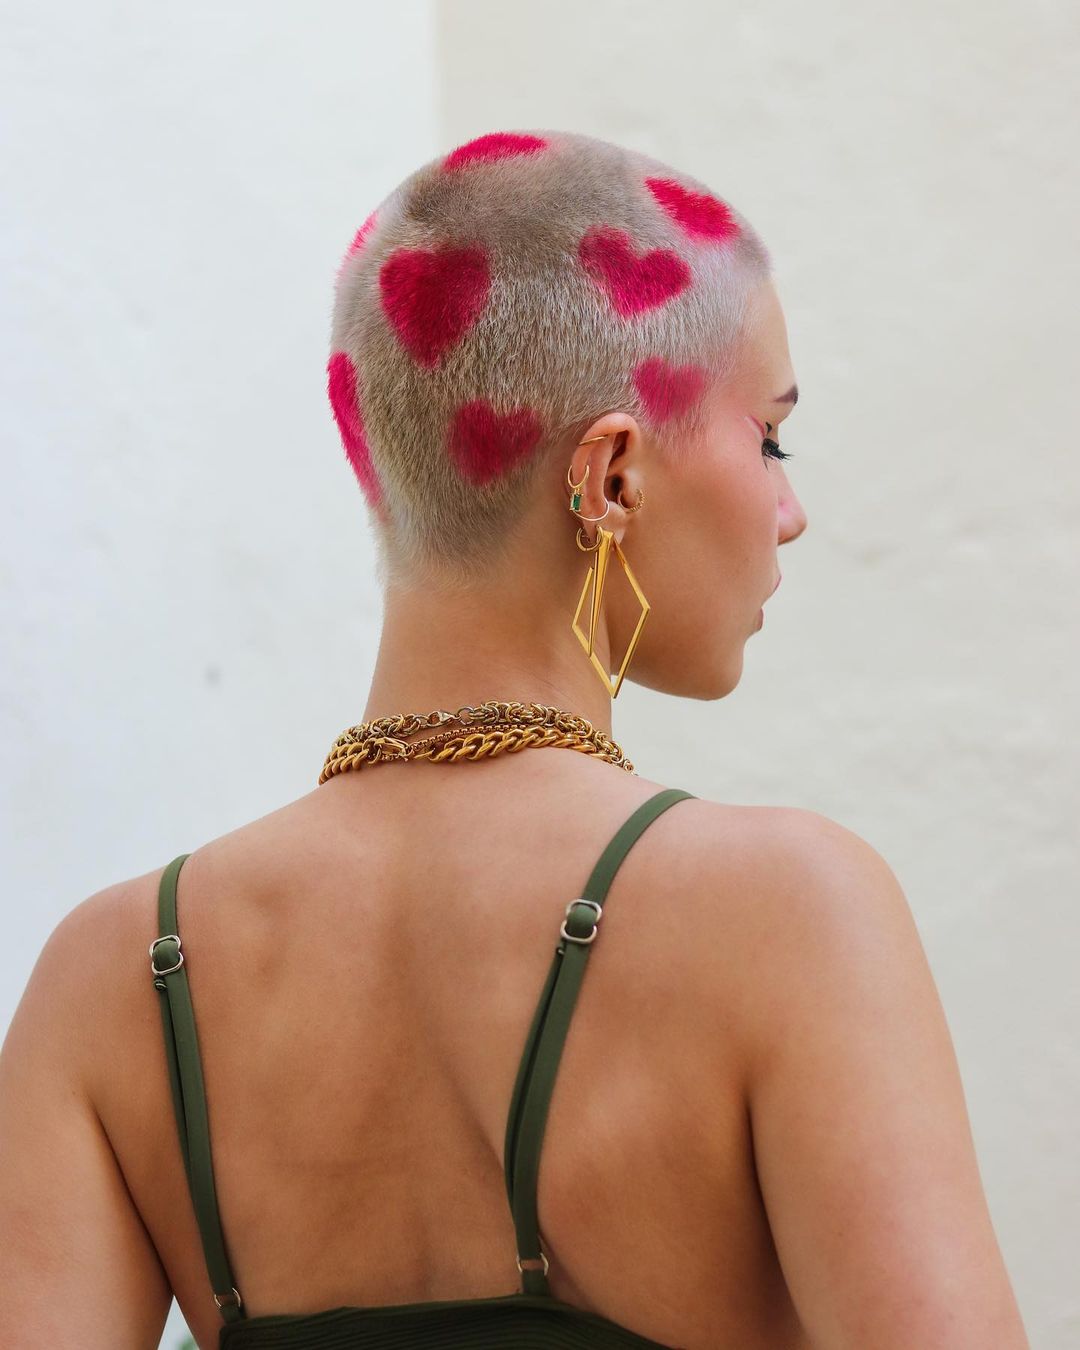 buzz cut with heart designs